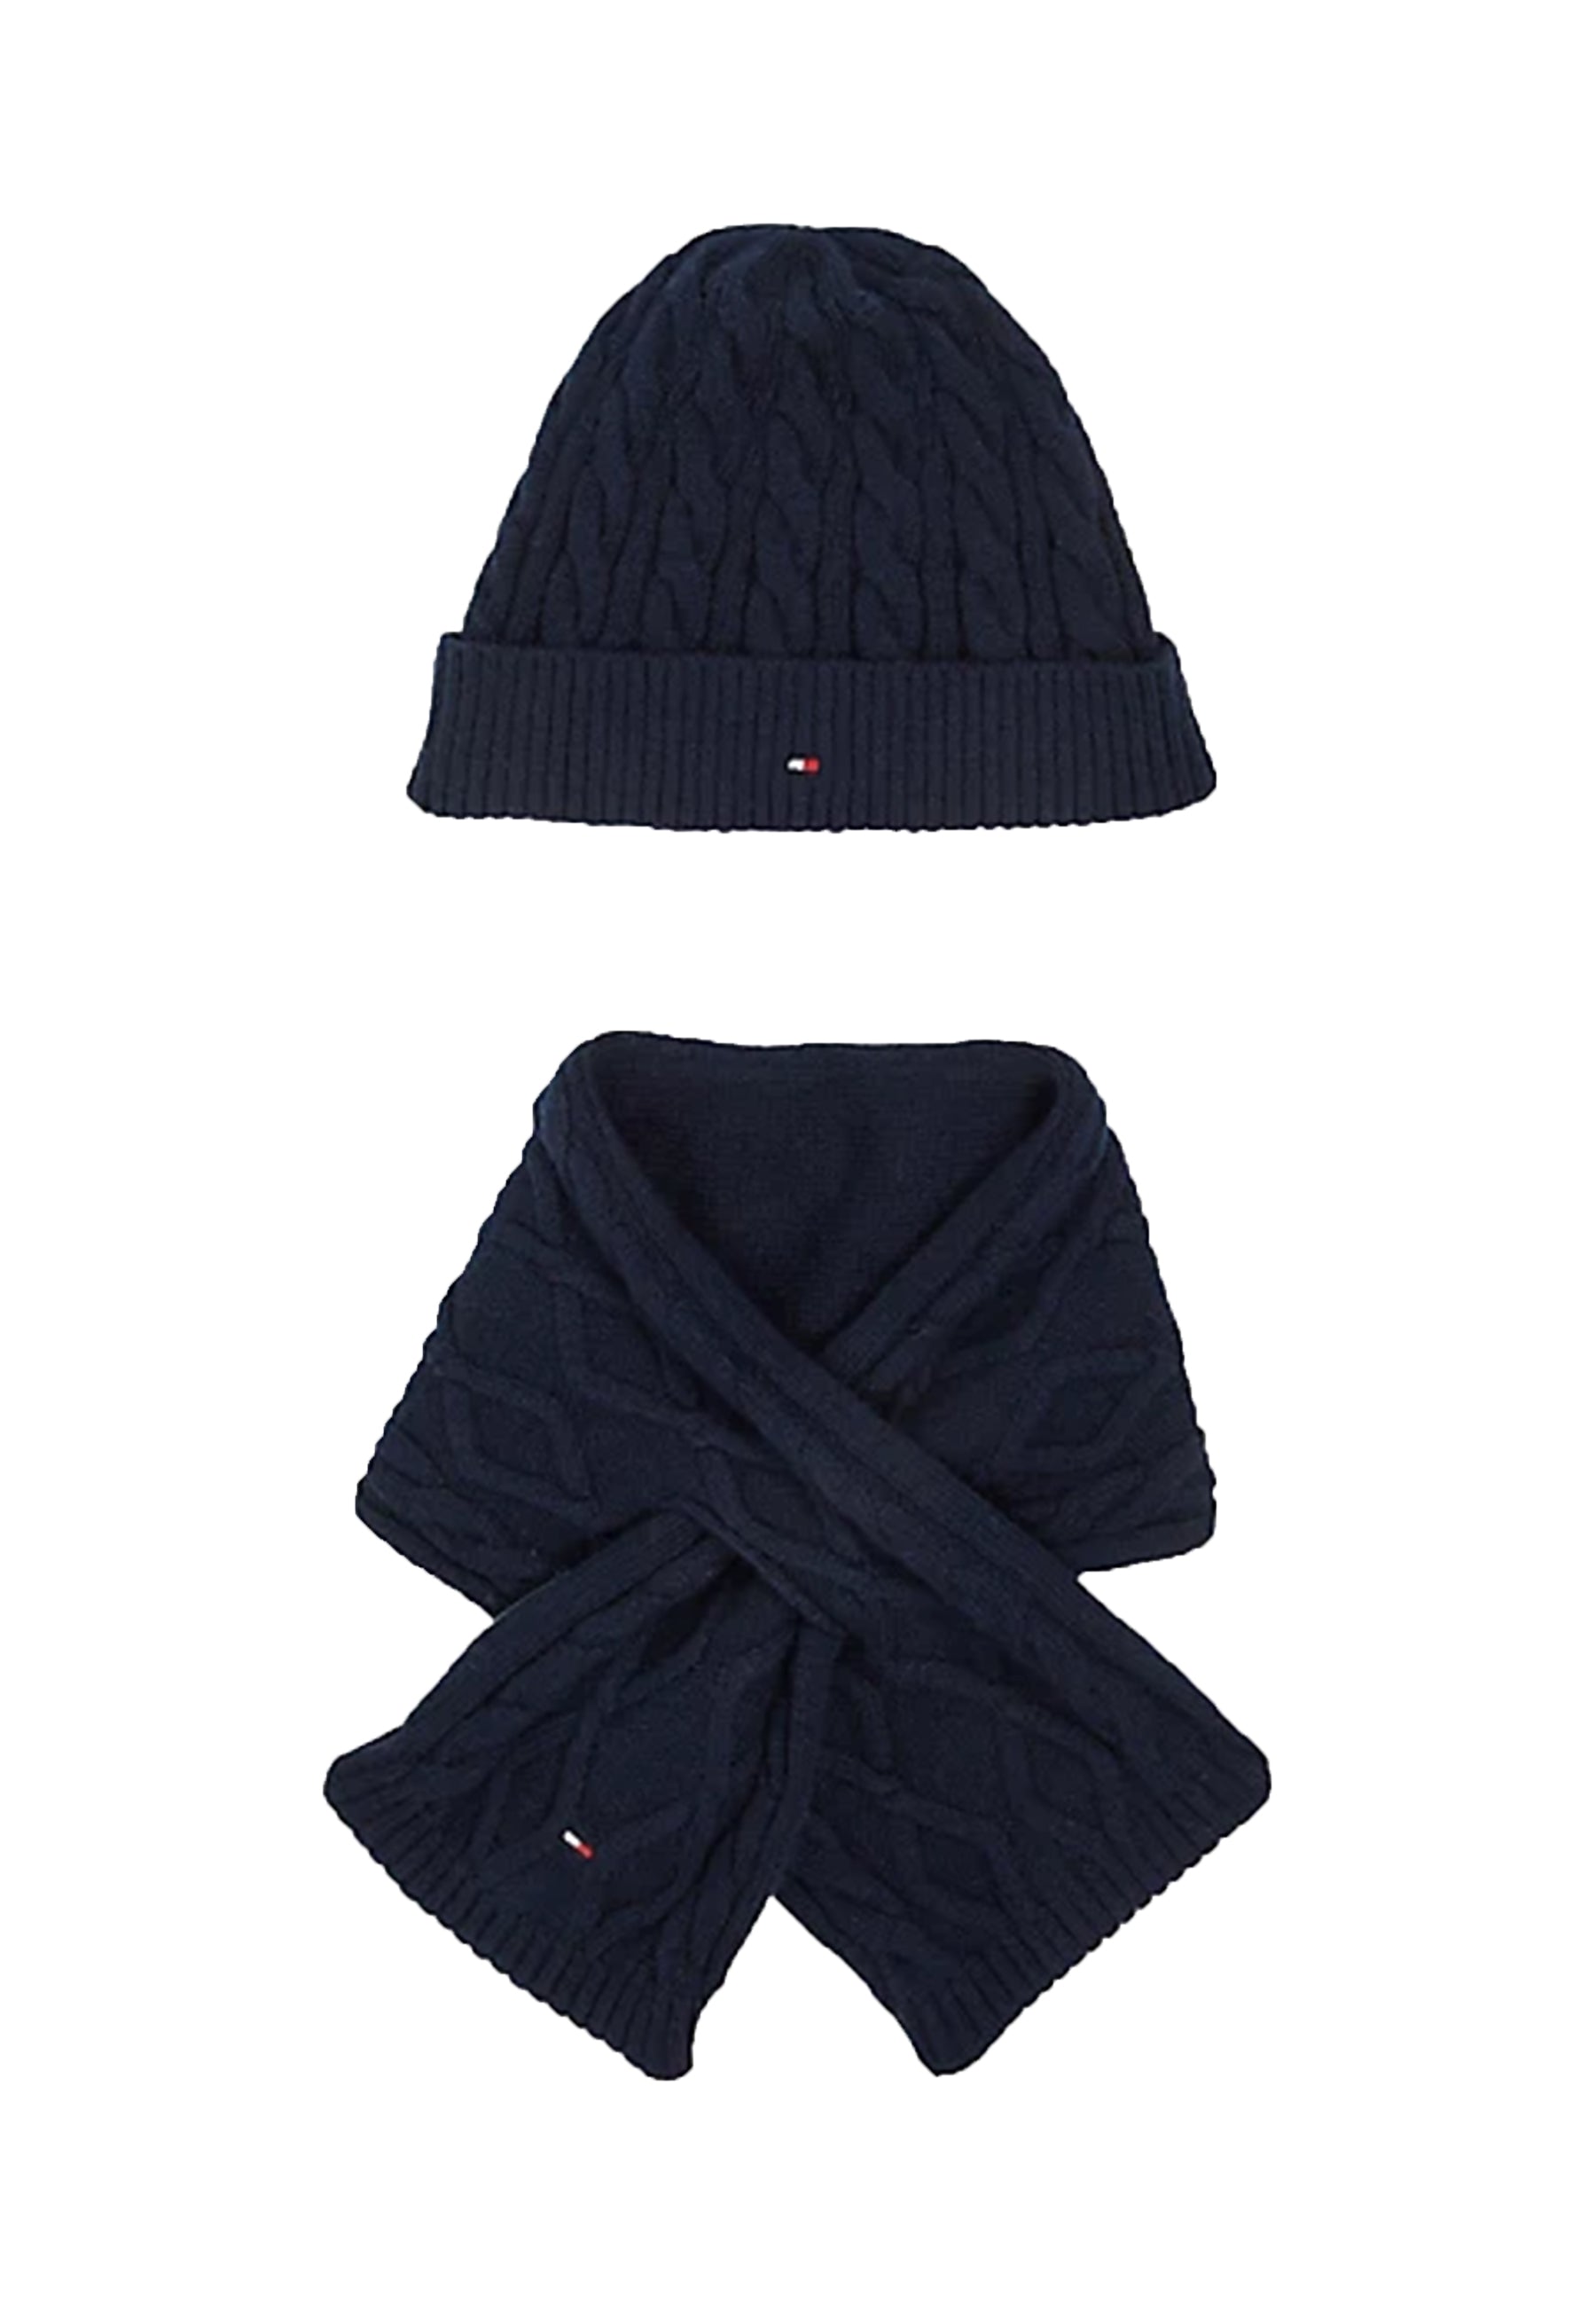 Tommy Hilfiger set regalo blu navy neonato in cotone product